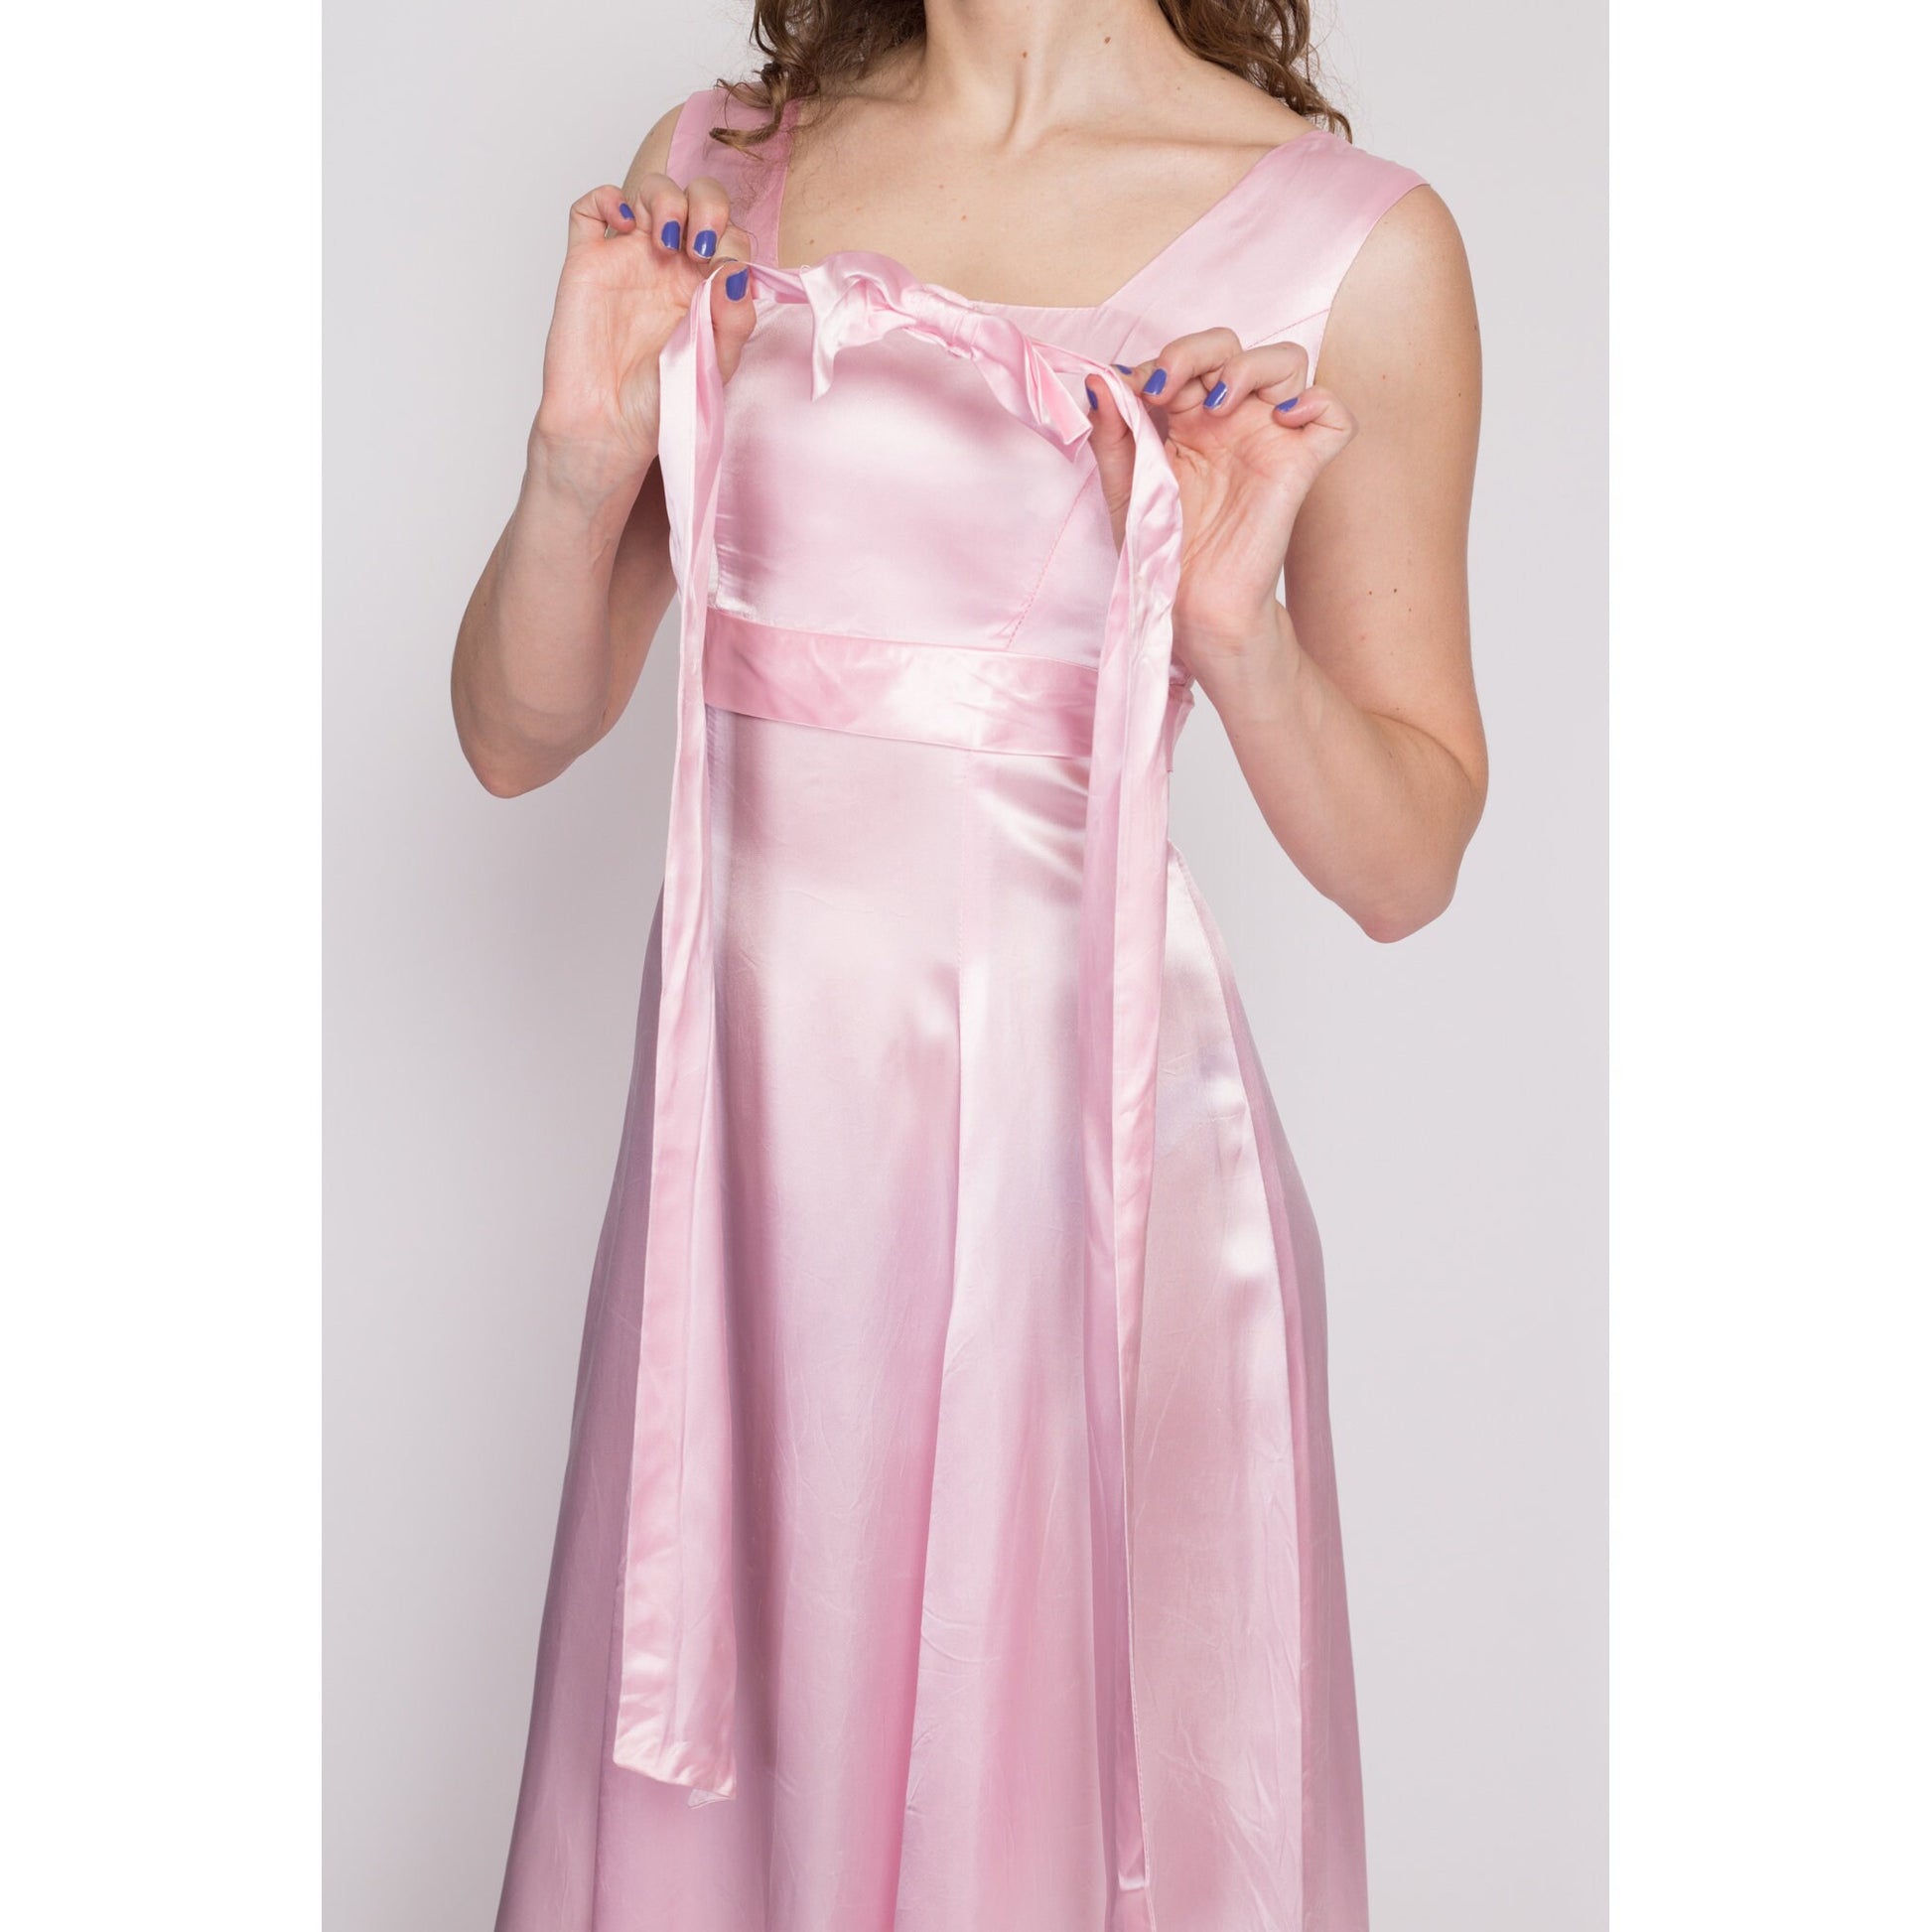 S| 70s Pink Satin Maxi Dress - Small | Vintage A Line Empire Waist Sleeveless Party Gown